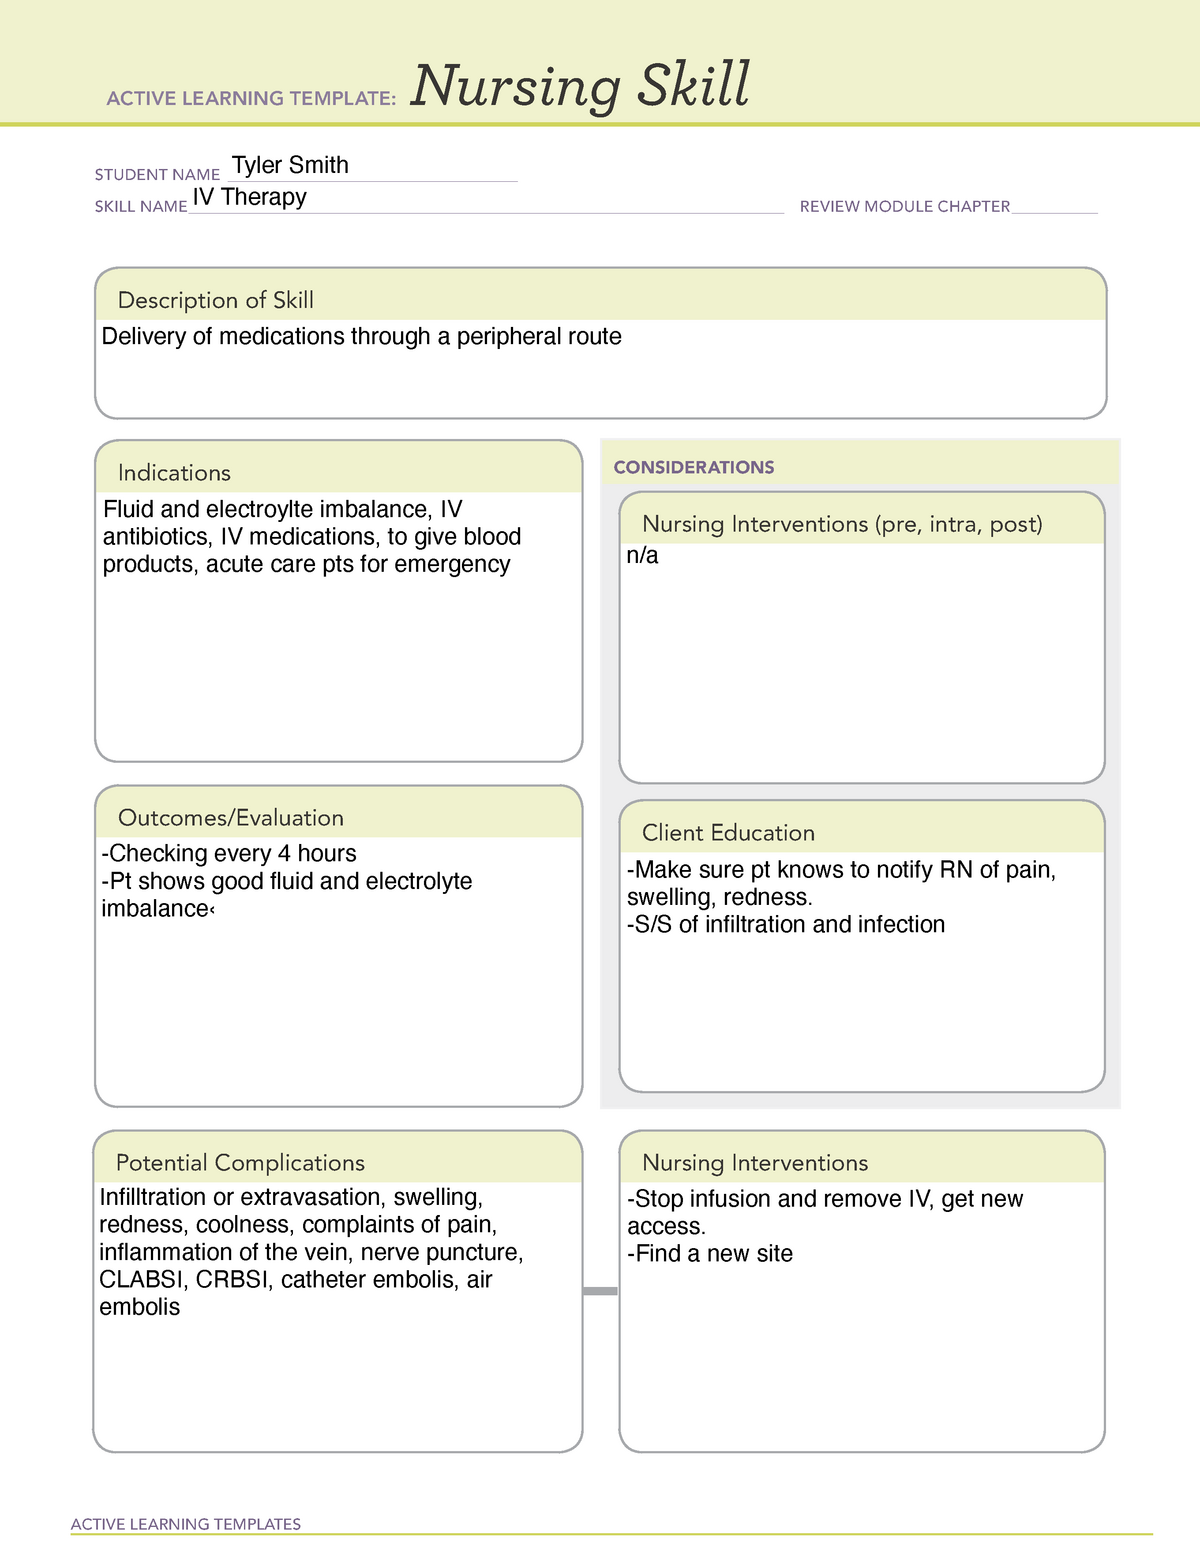 lab-activity-nursing-skill-template-iv-therapy-active-learning